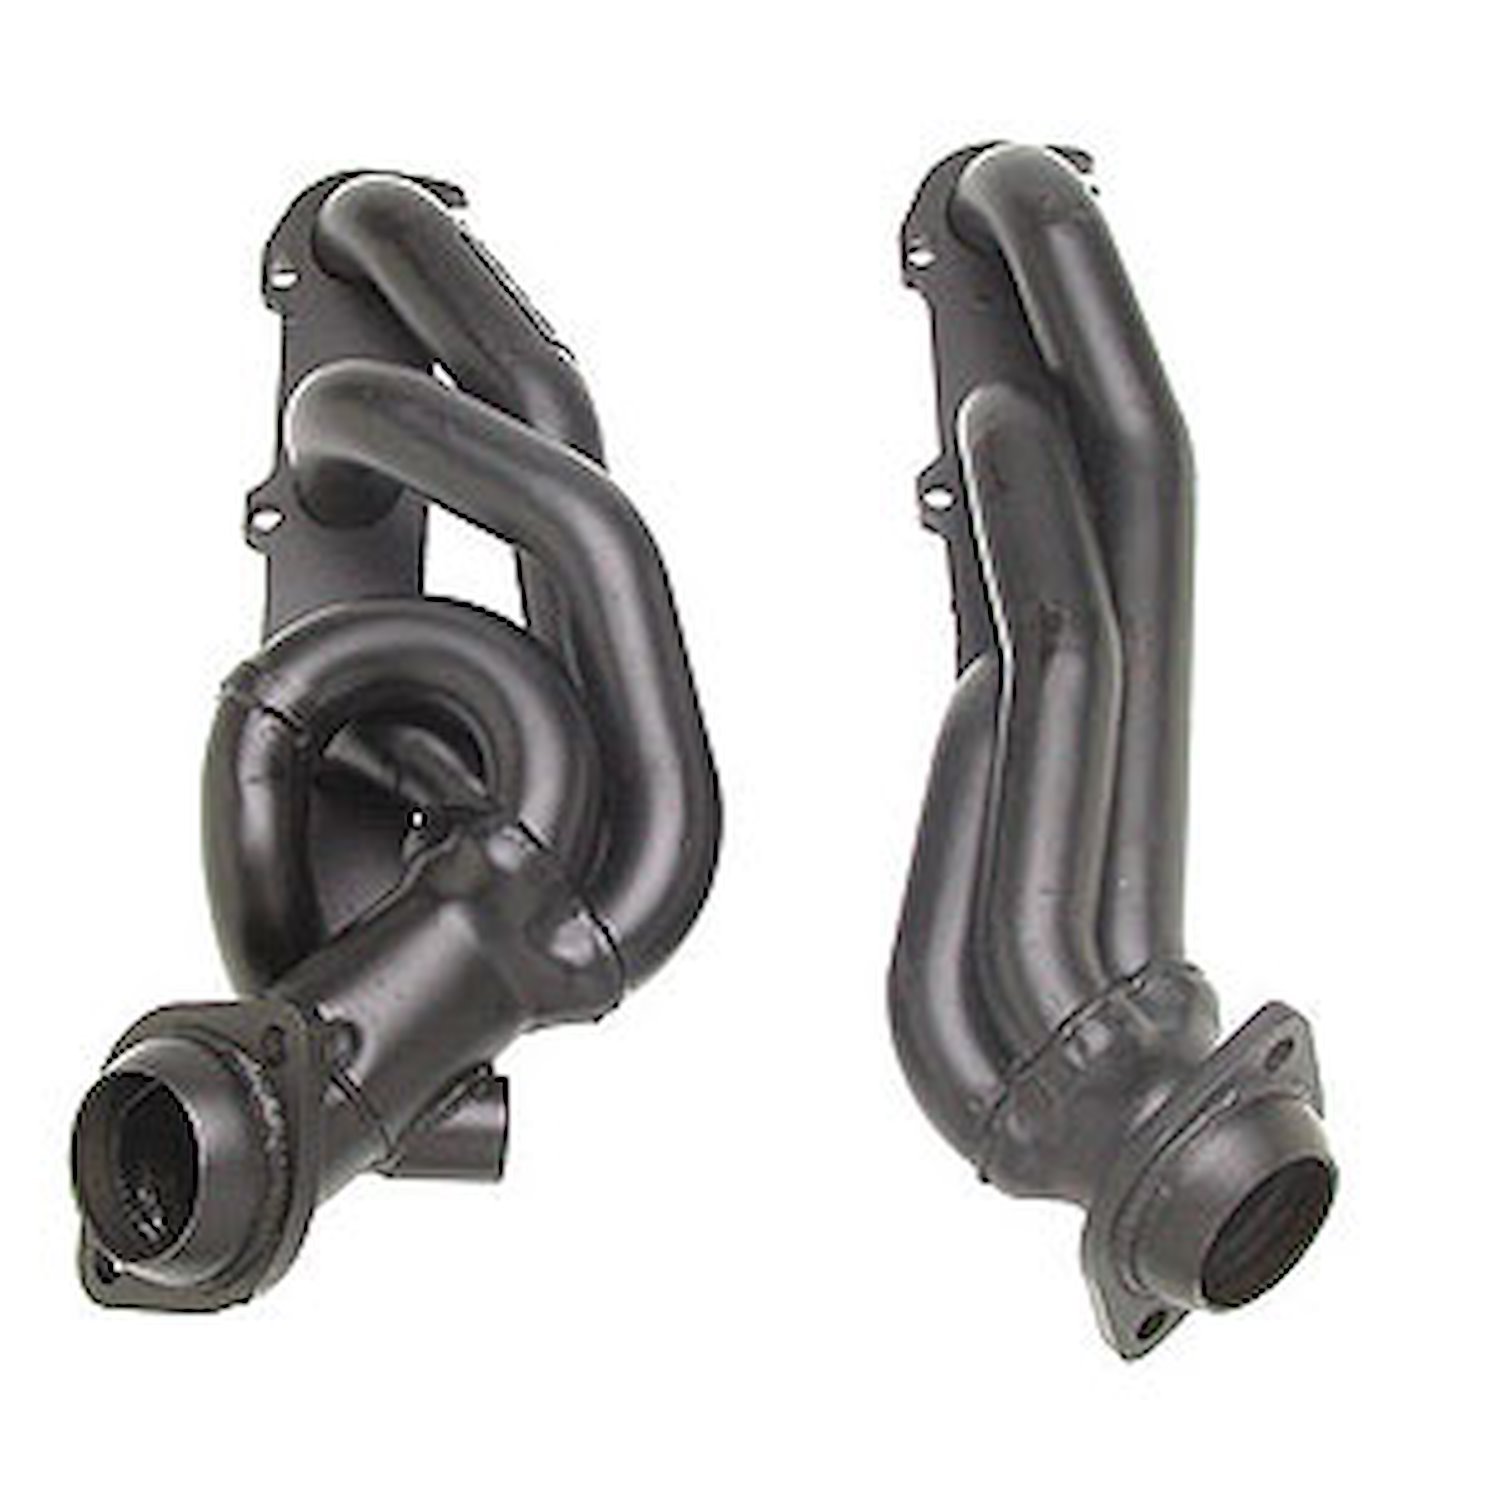 Standard Duty Uncoated Headers for 1998-2004 F-150/F-250 2WD/4WD 5.4L